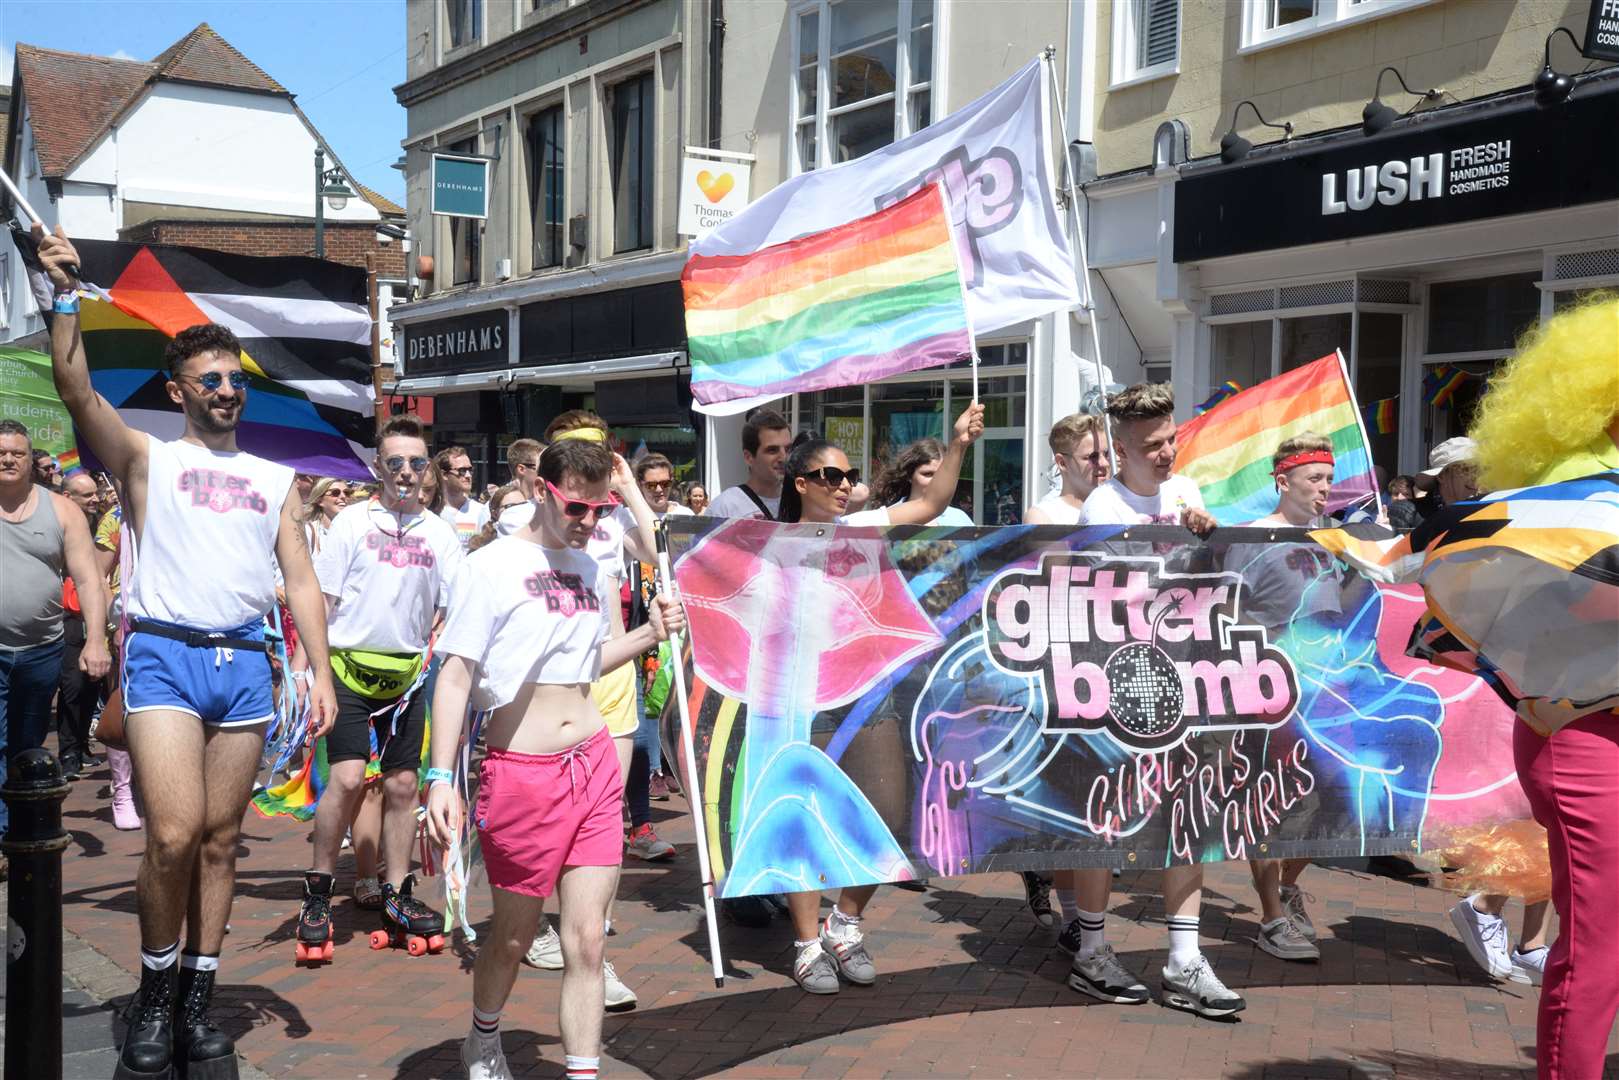 First LGBTQ+ Dover Pride event on August 31